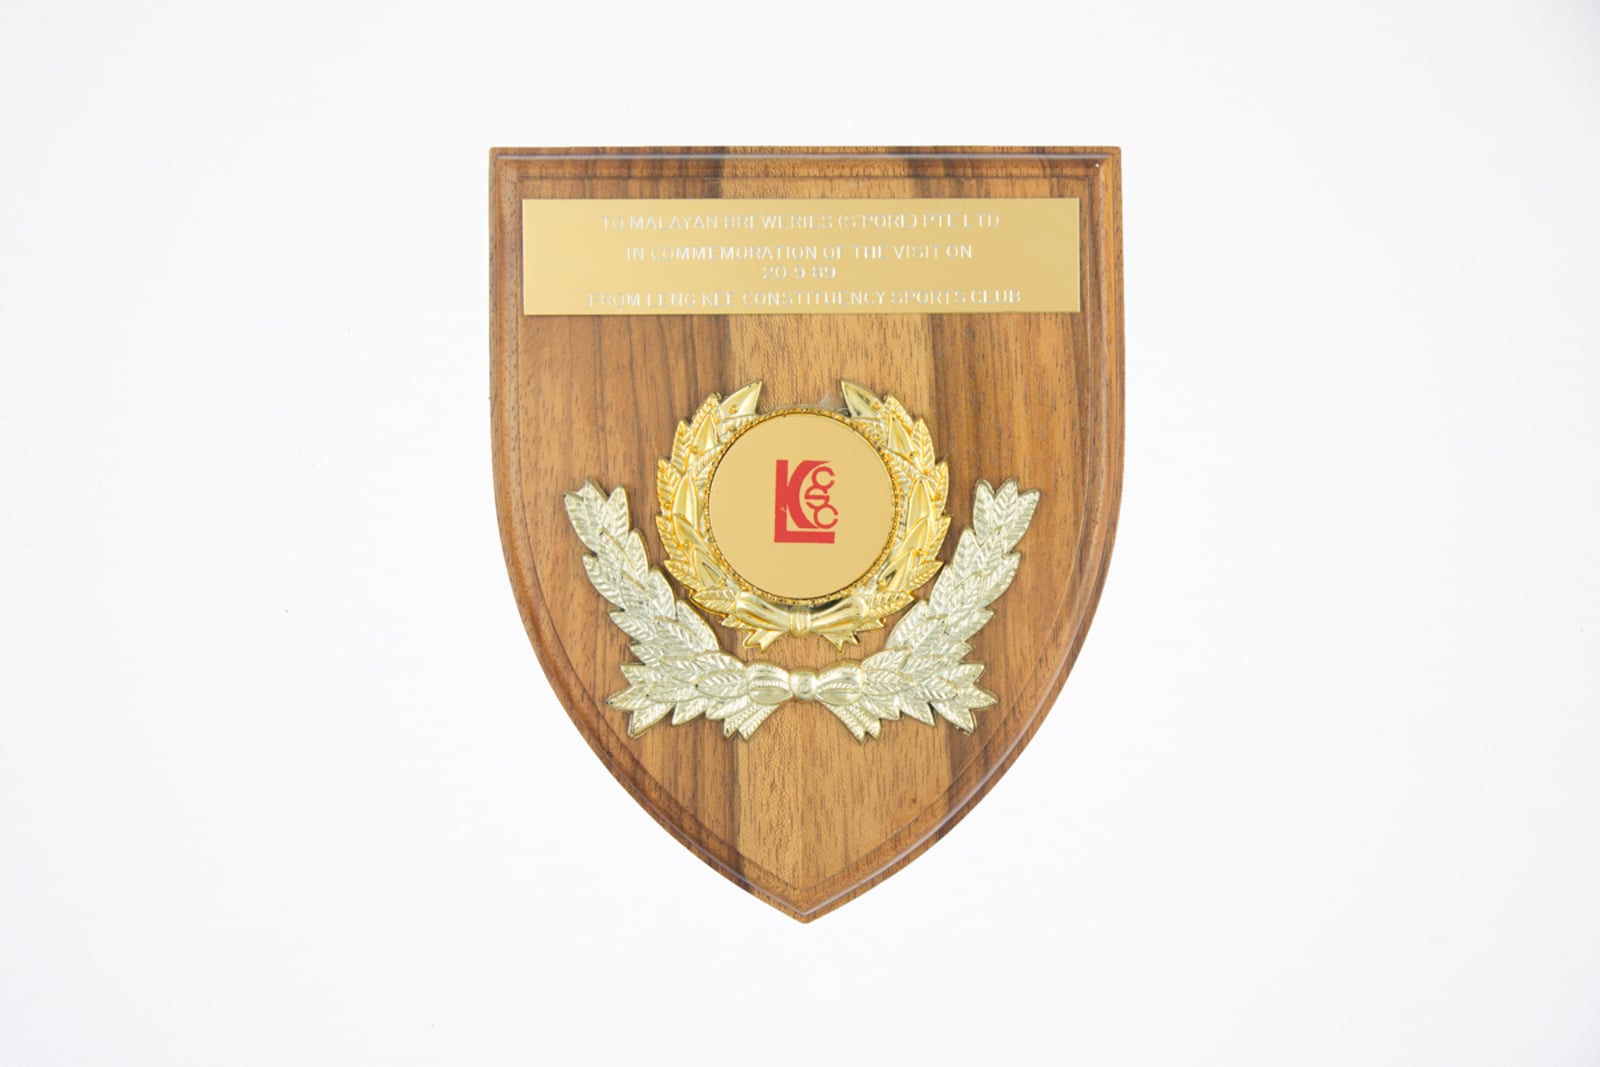 Leng Kee Constituency Sports Club Plaque 1989